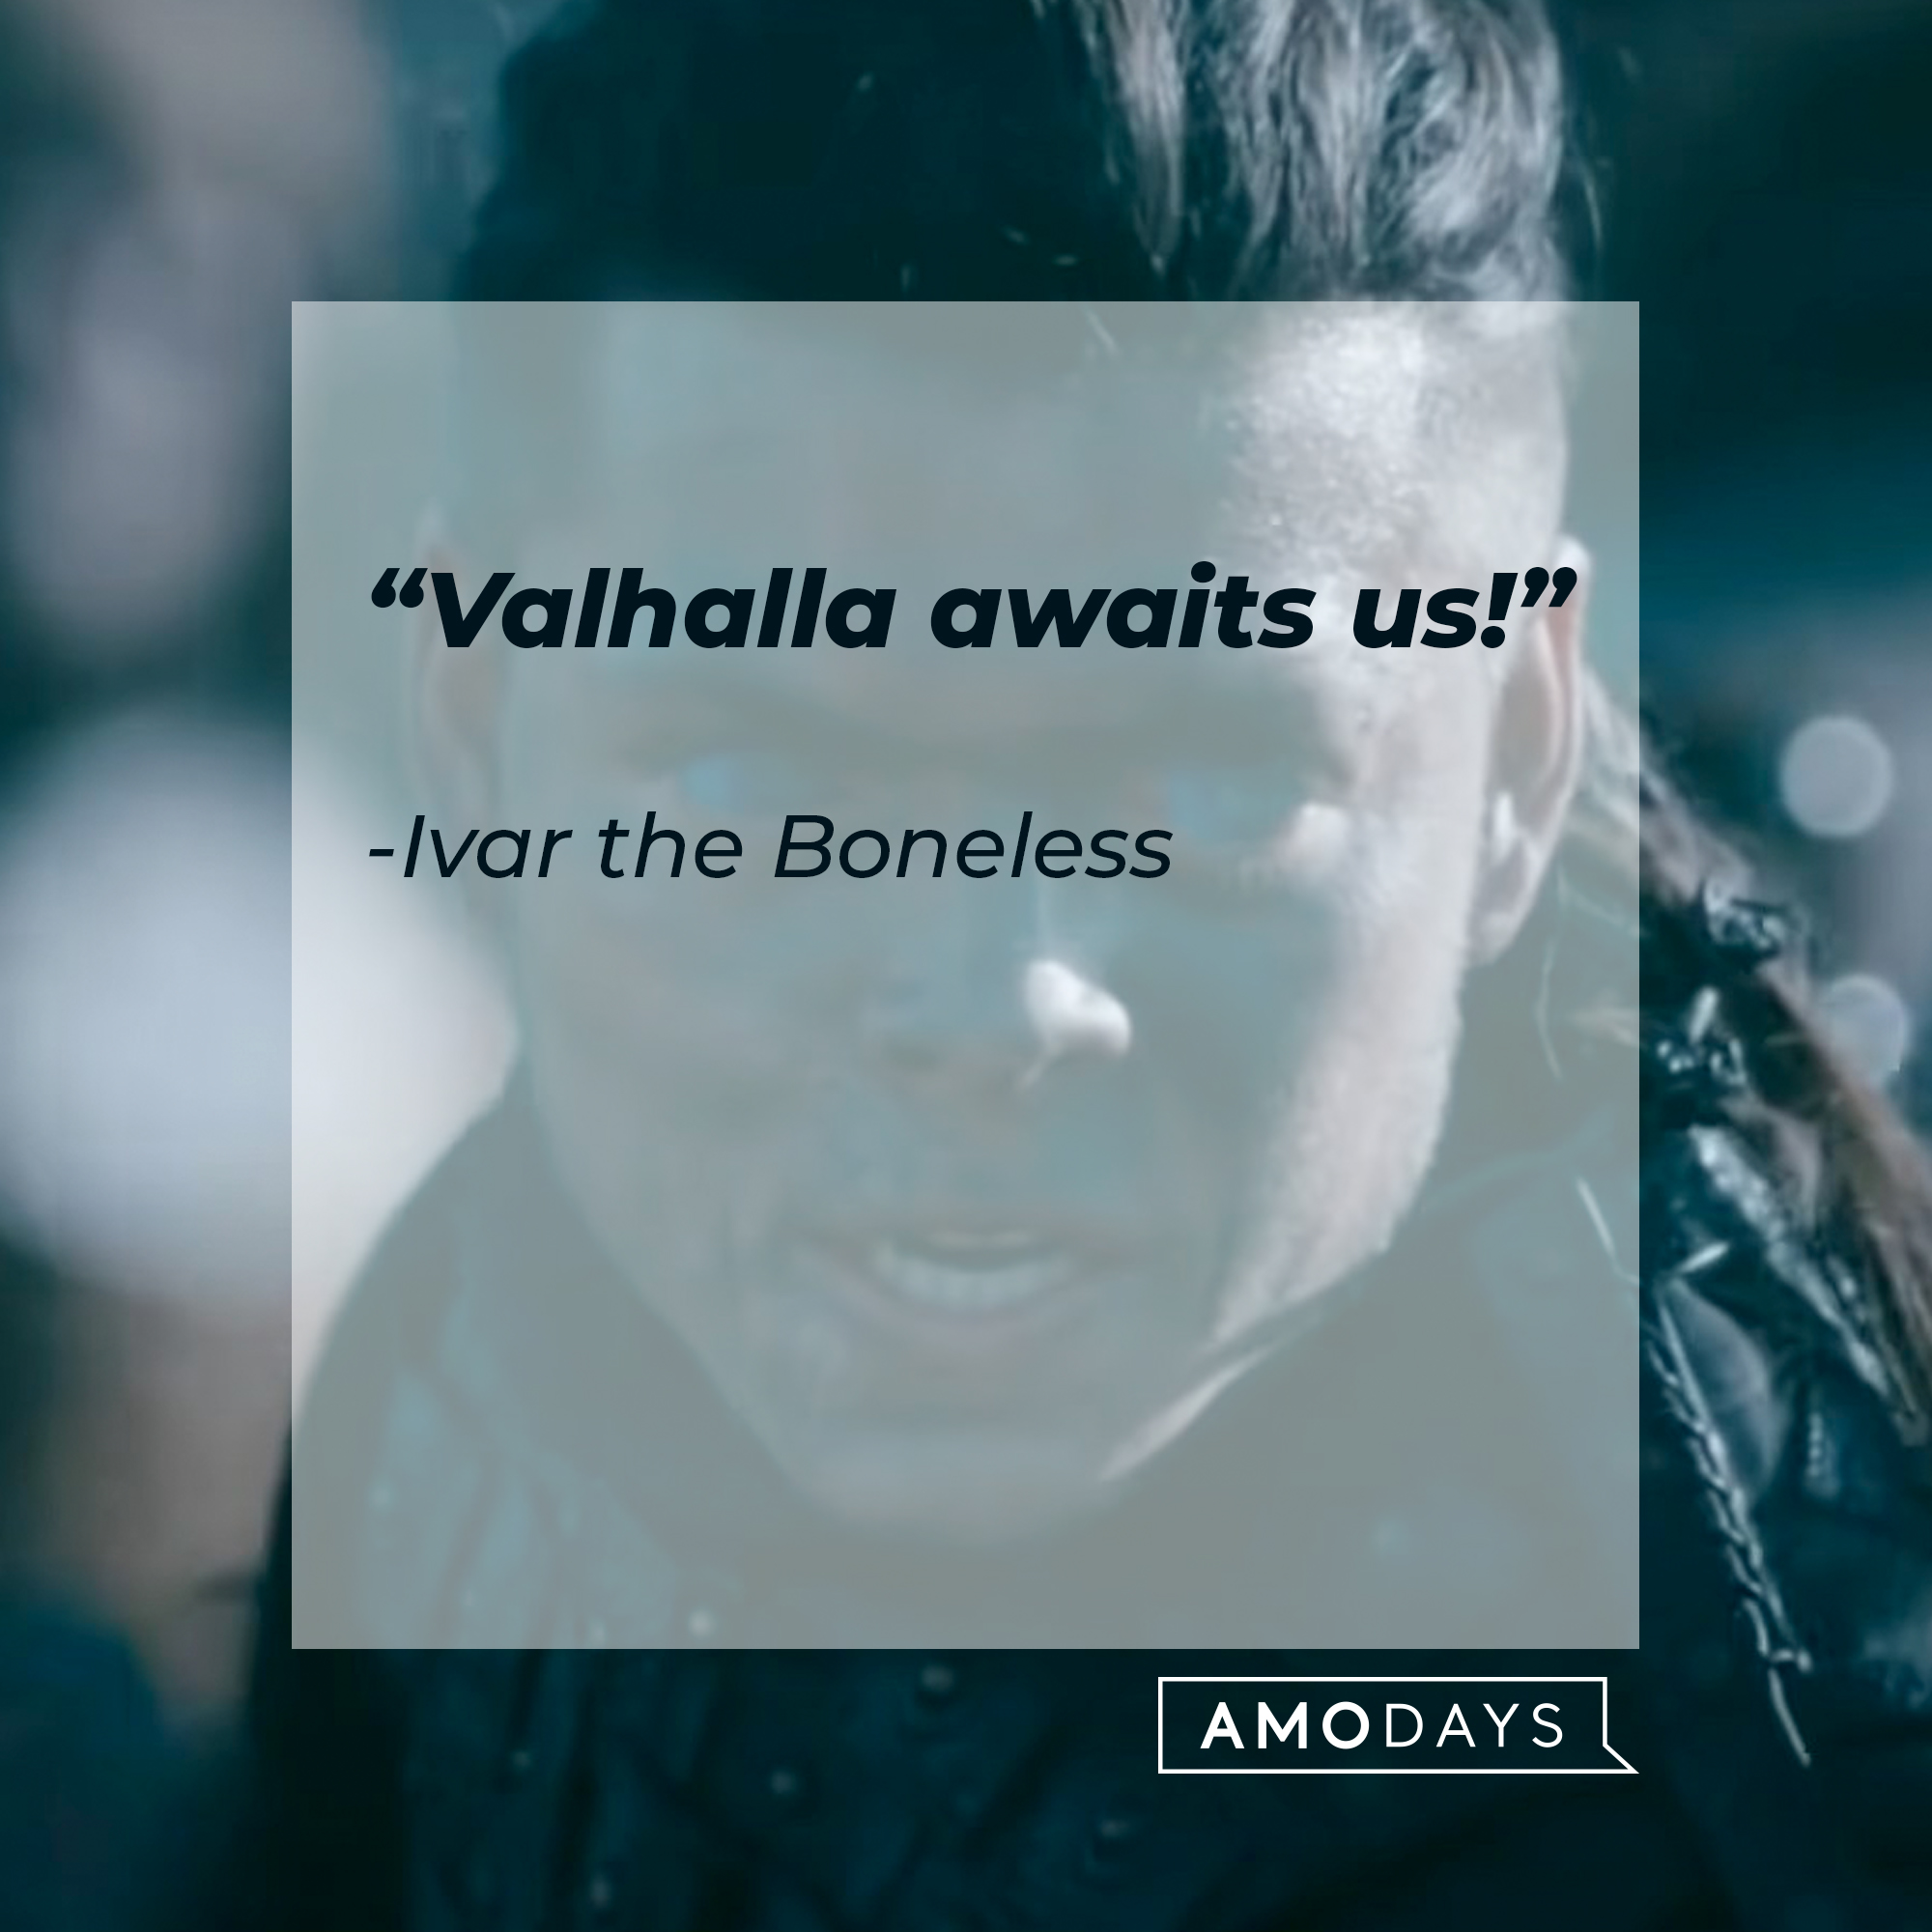 A picture of Ivar the Boneless with his quote: “Valhalla awaits us!” ┃Source: youtube.com/PrimeVideoUK